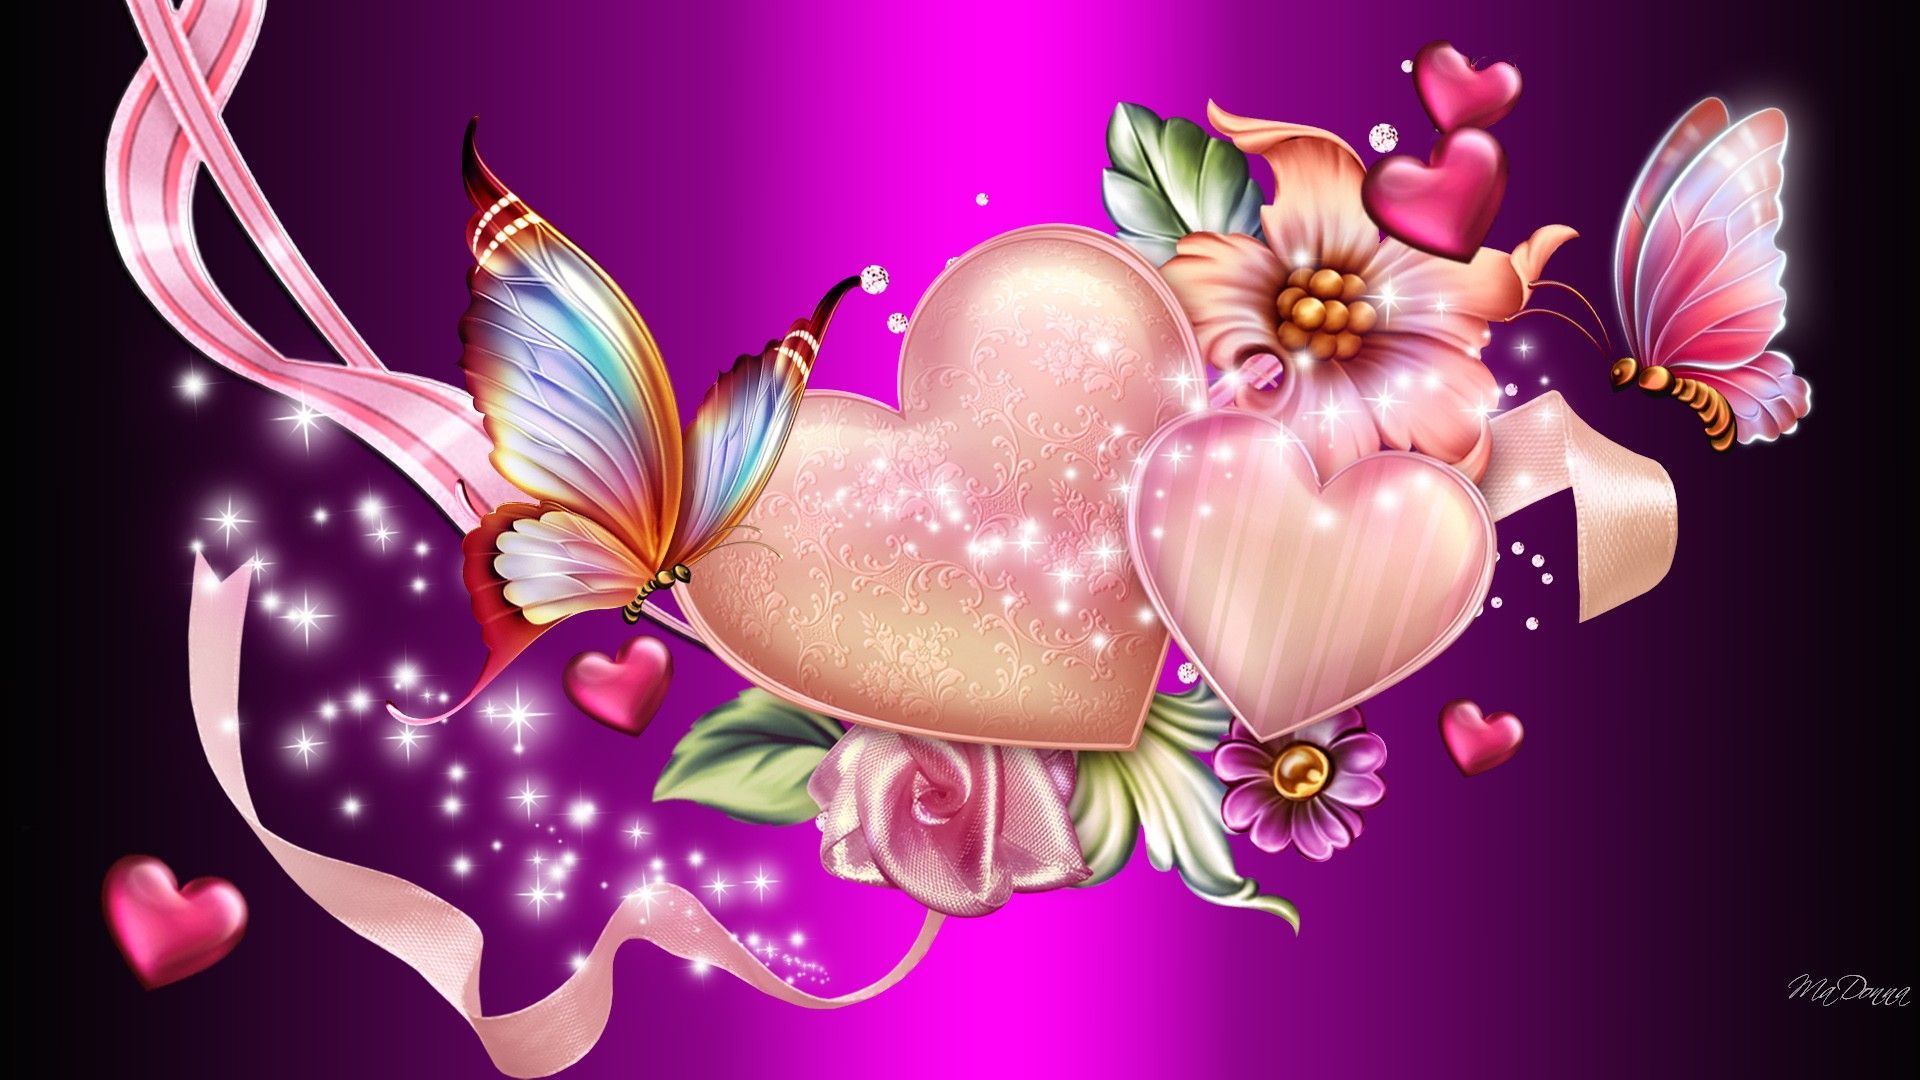 Hearts and Butterfly Wallpaper Free Hearts and Butterfly Background